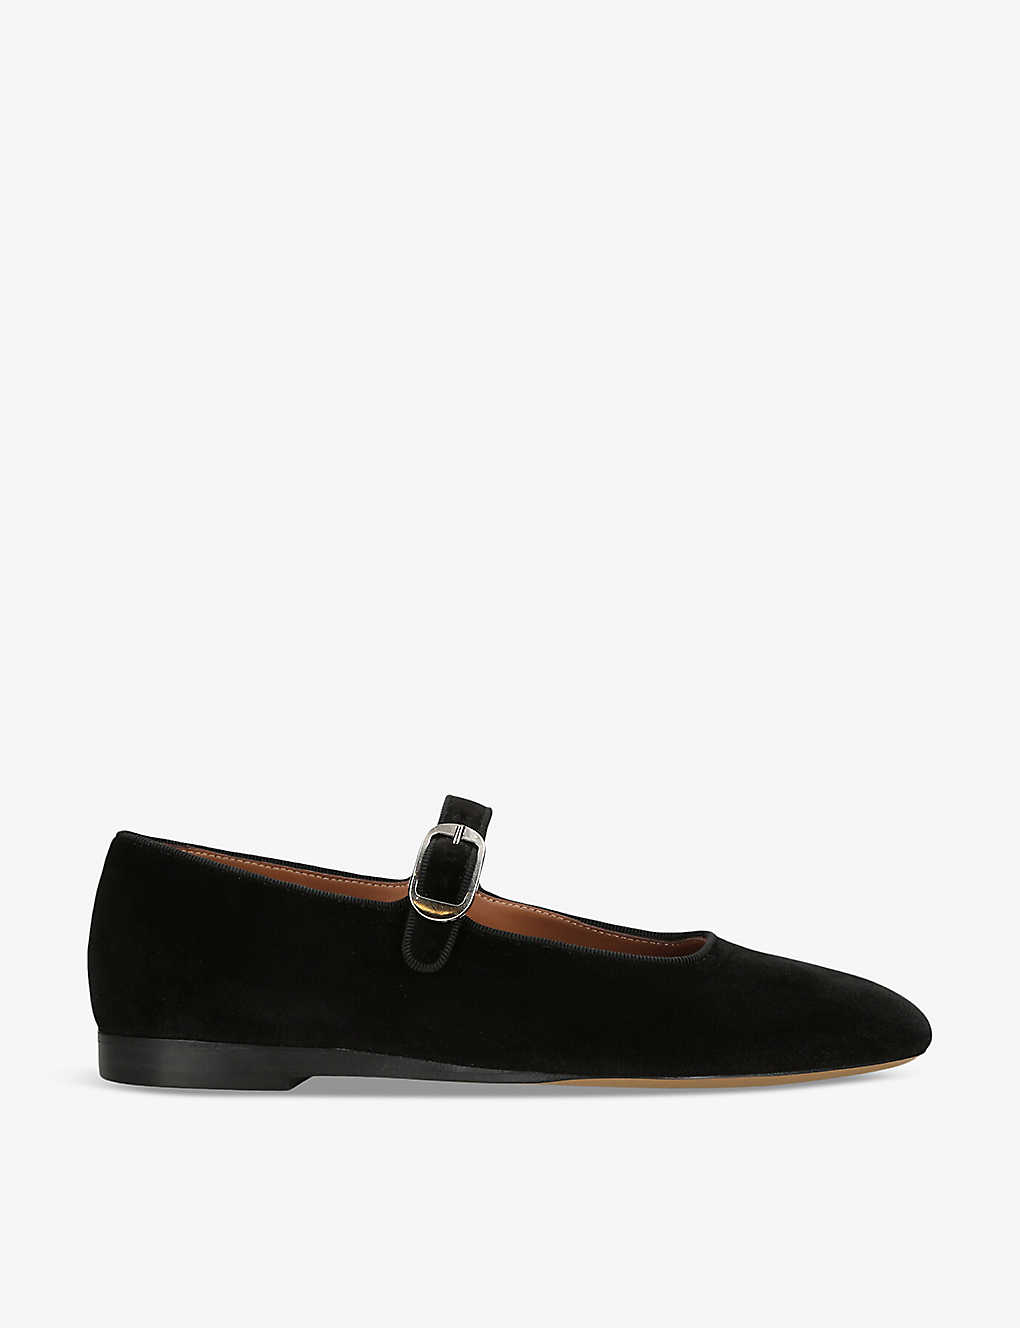 Le Monde Beryl Womens Black Round-toe Suede Mary Jane Courts